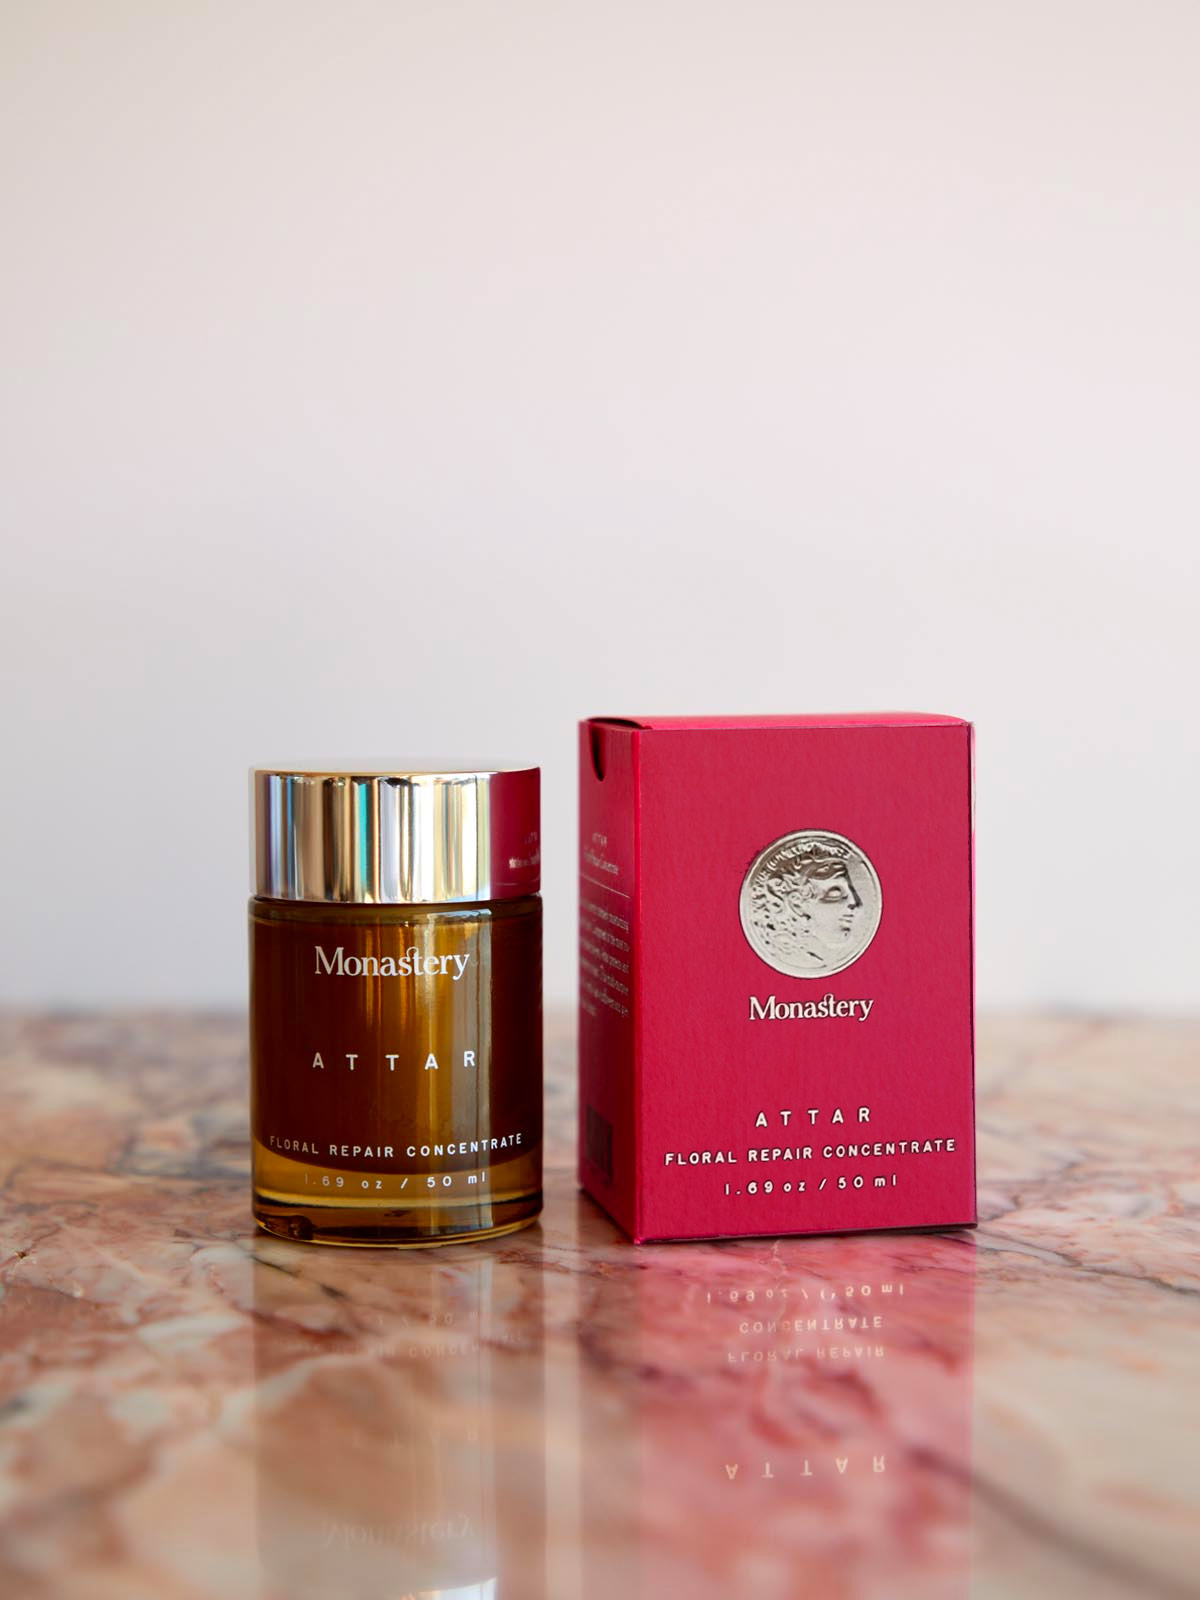 Monastery Attar floral concentrate and box on a marble surface